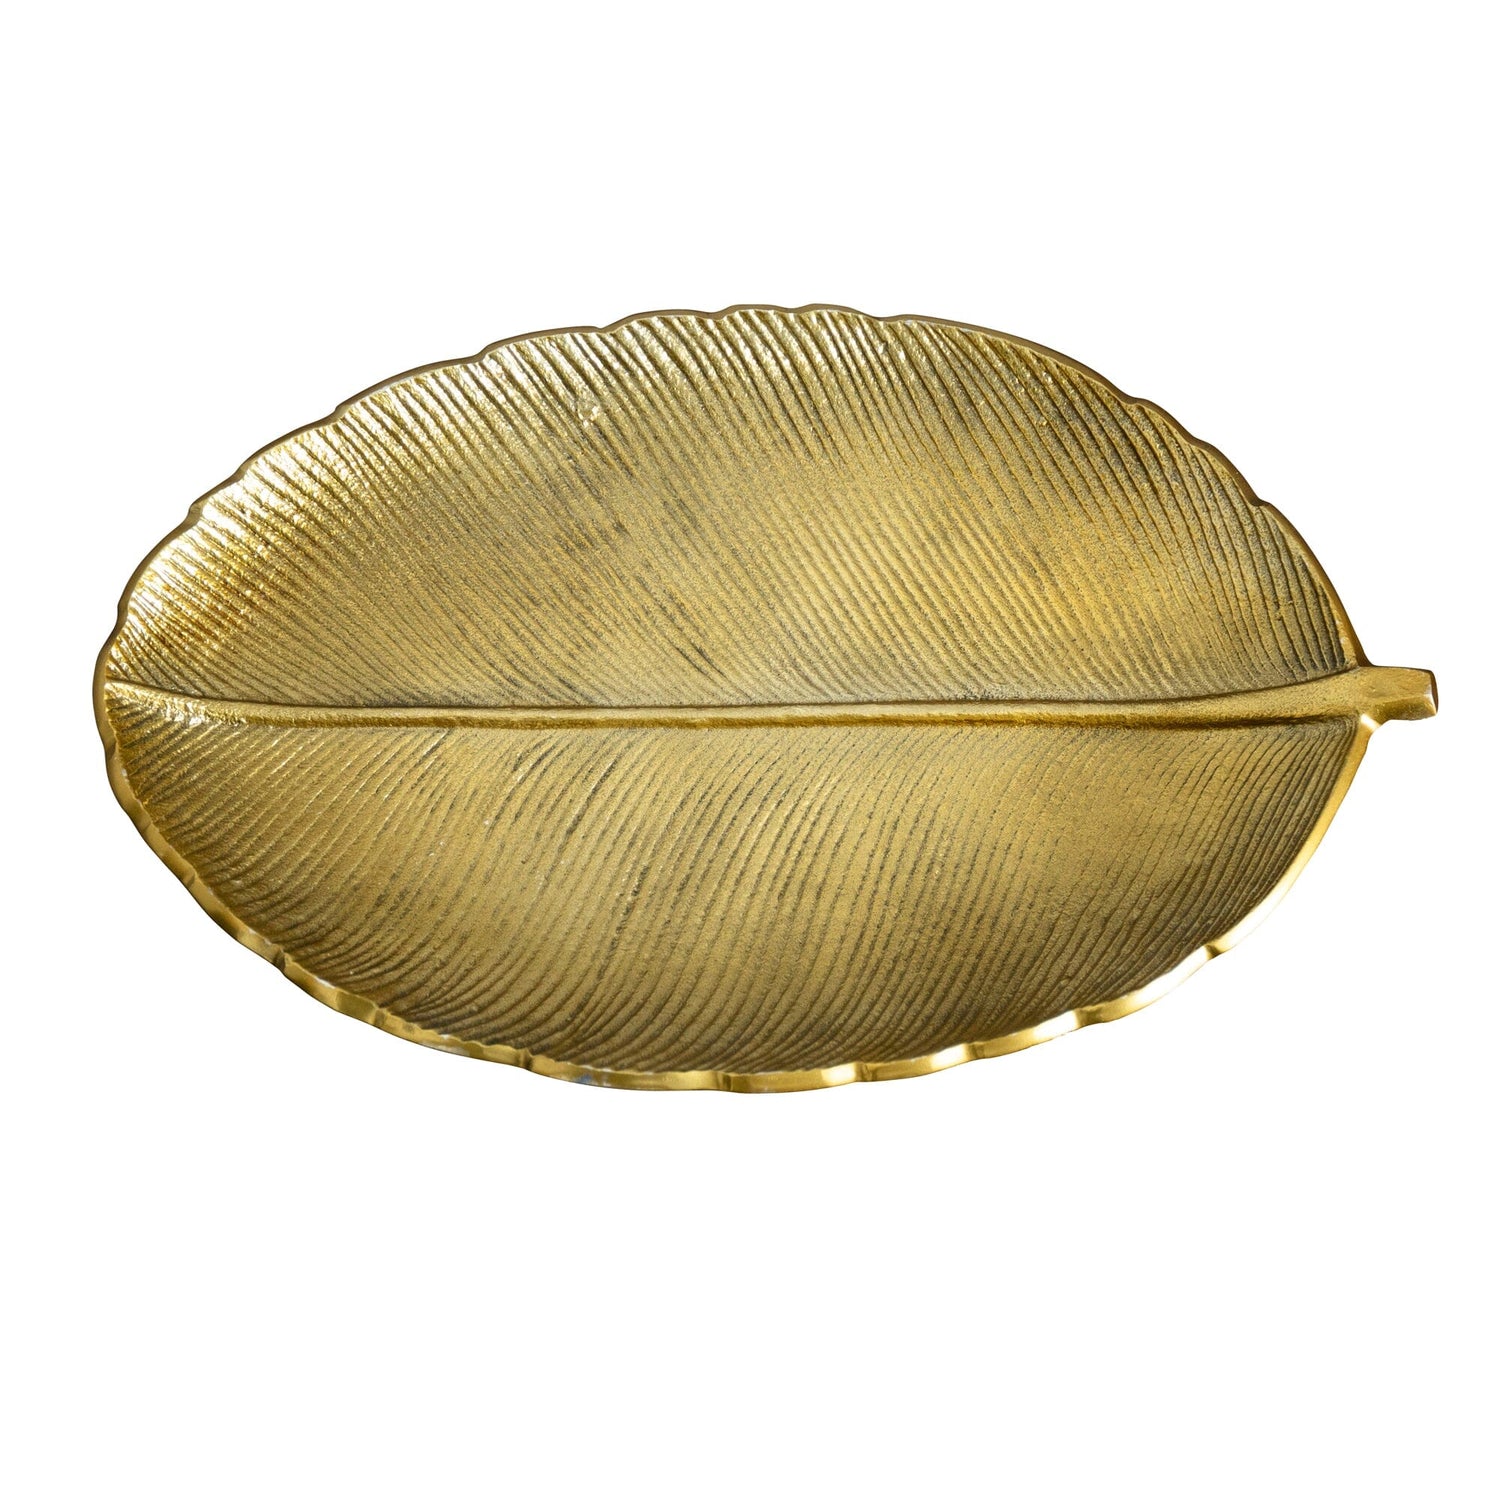 16” Gold Leaf Tray Decorative Accent